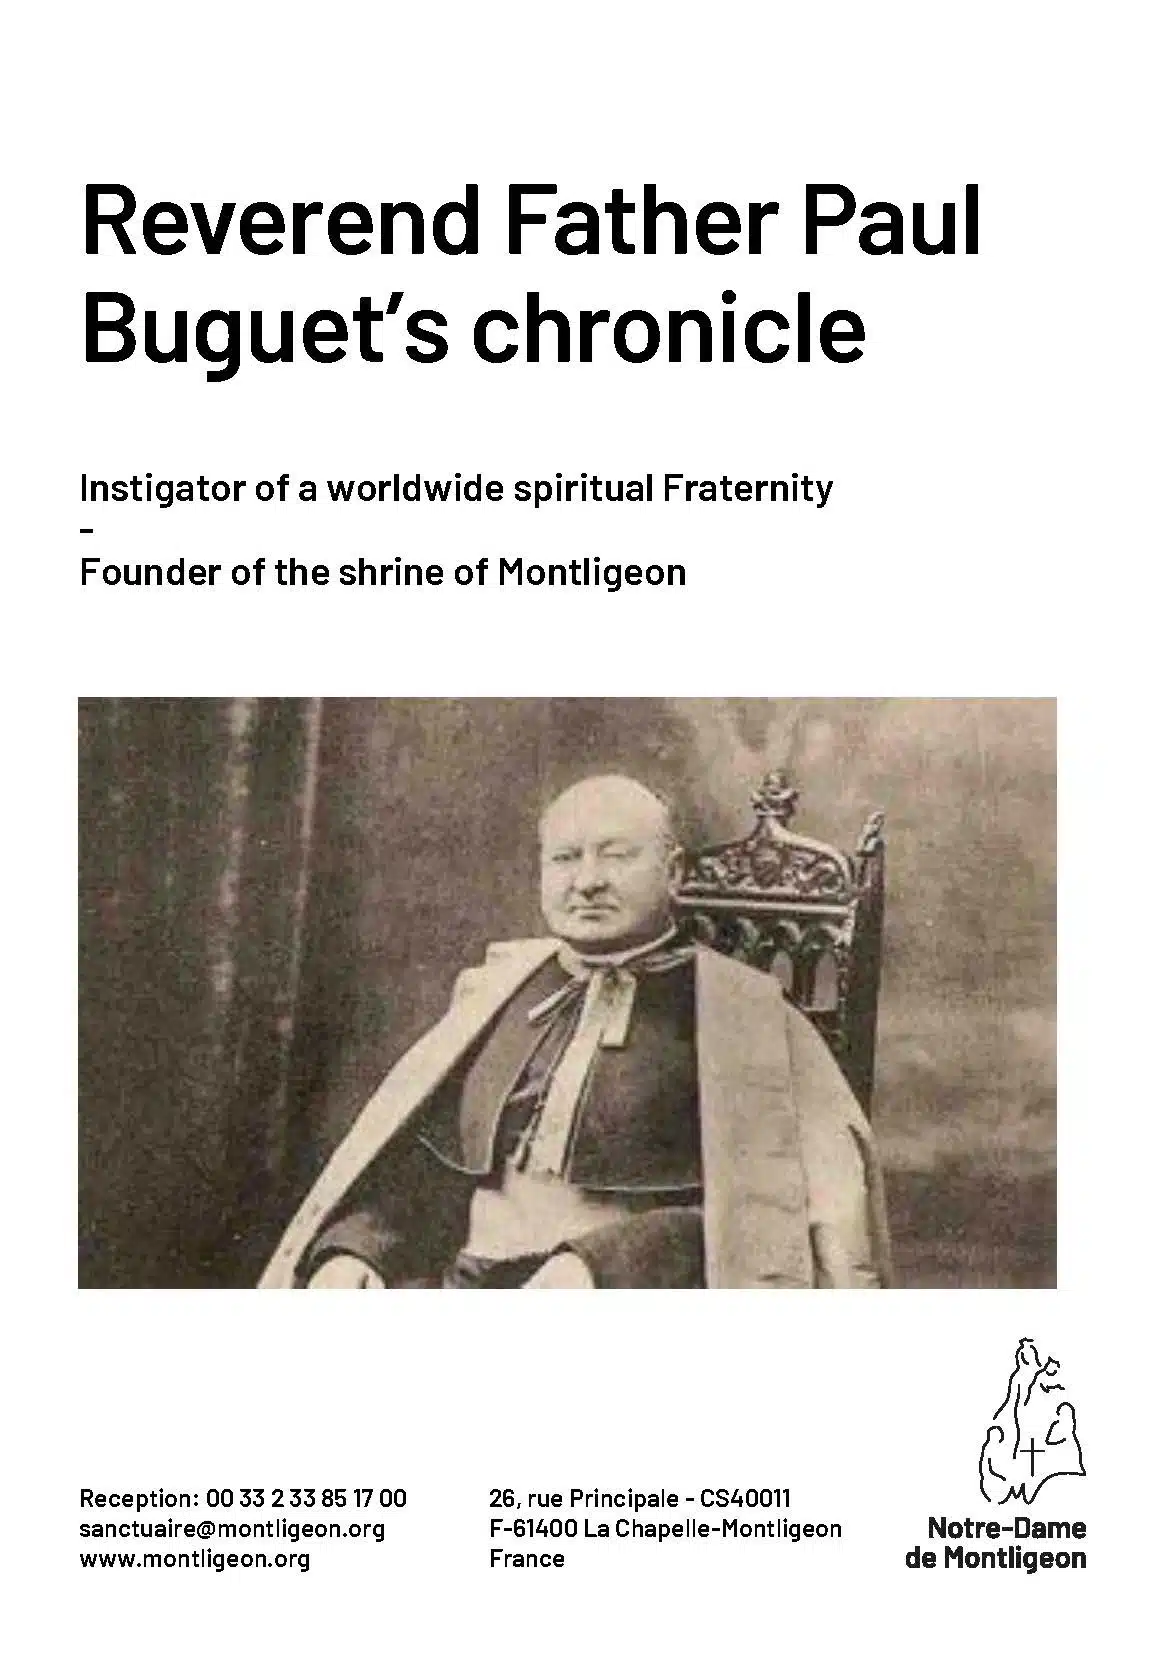 Reverend Father Paul Buguet’s chronicle Instigator of a worldwide spiritual Fraternity - Founder of the shrine of Montligeon